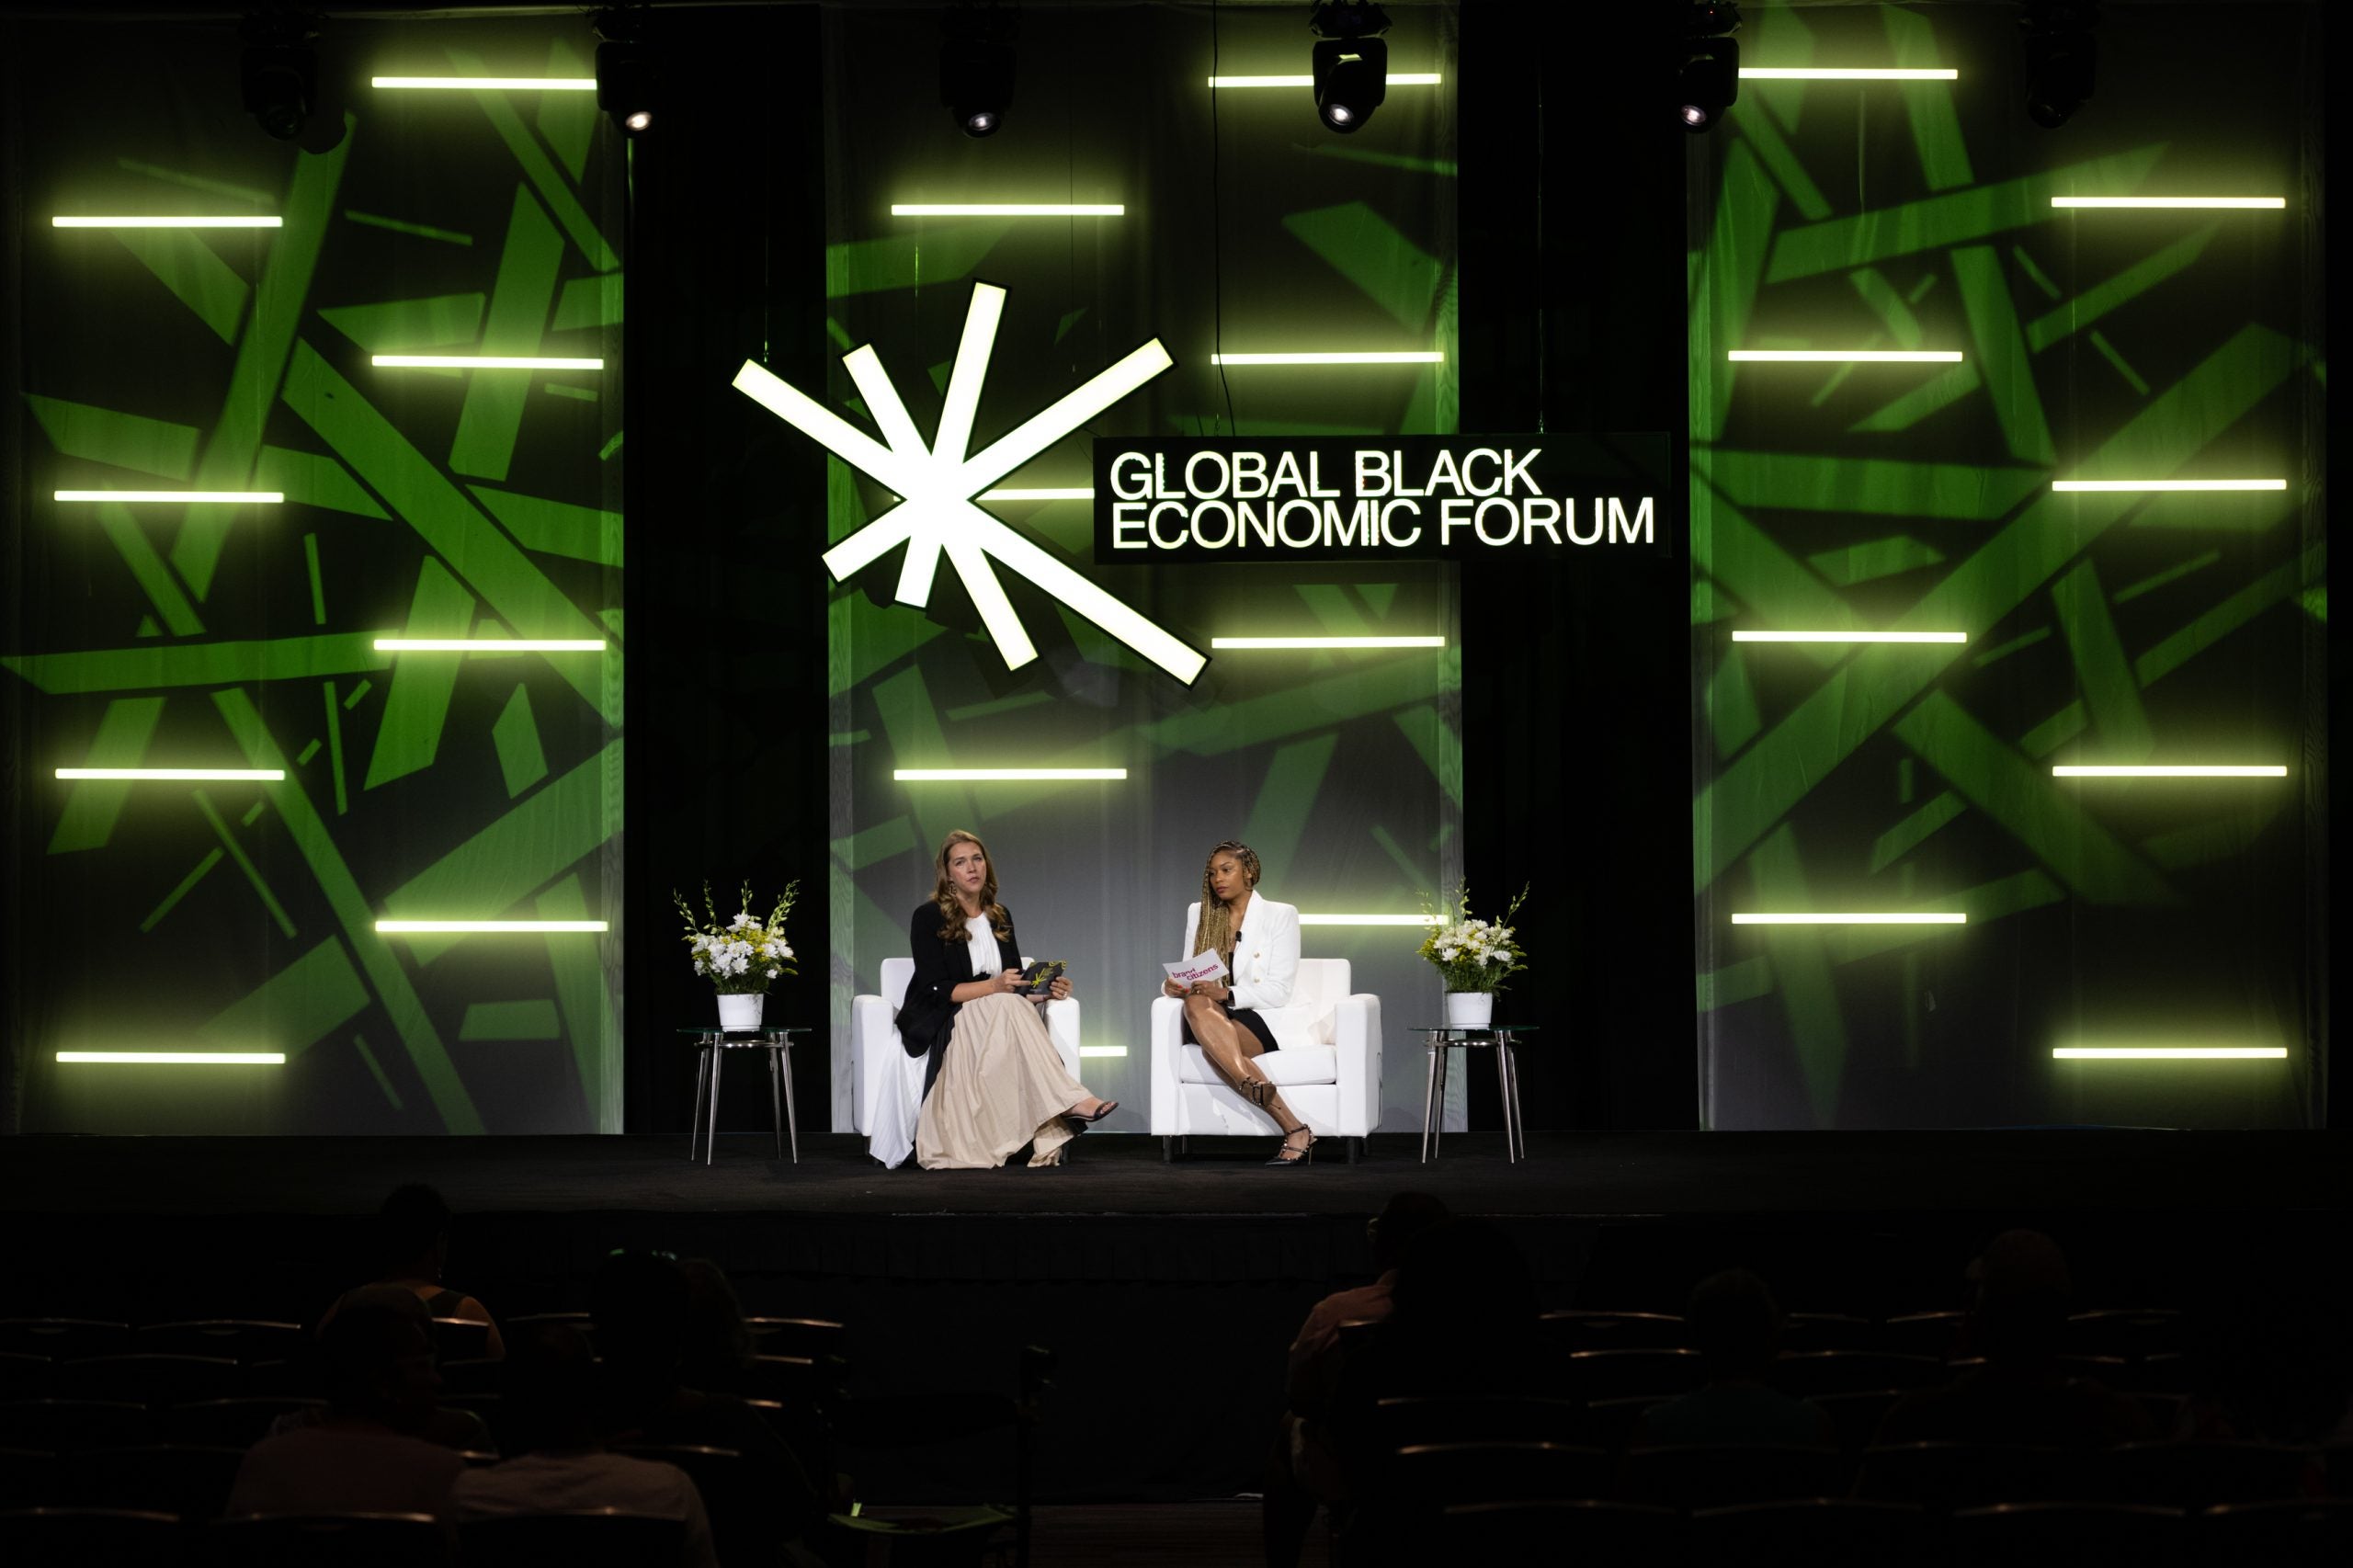 “There’s A Sense Of Allyship, But Little Action”: Key Data Spotlights The State Of Wealth And Health At The Global Black Economic Forum At ESSENCE Fest